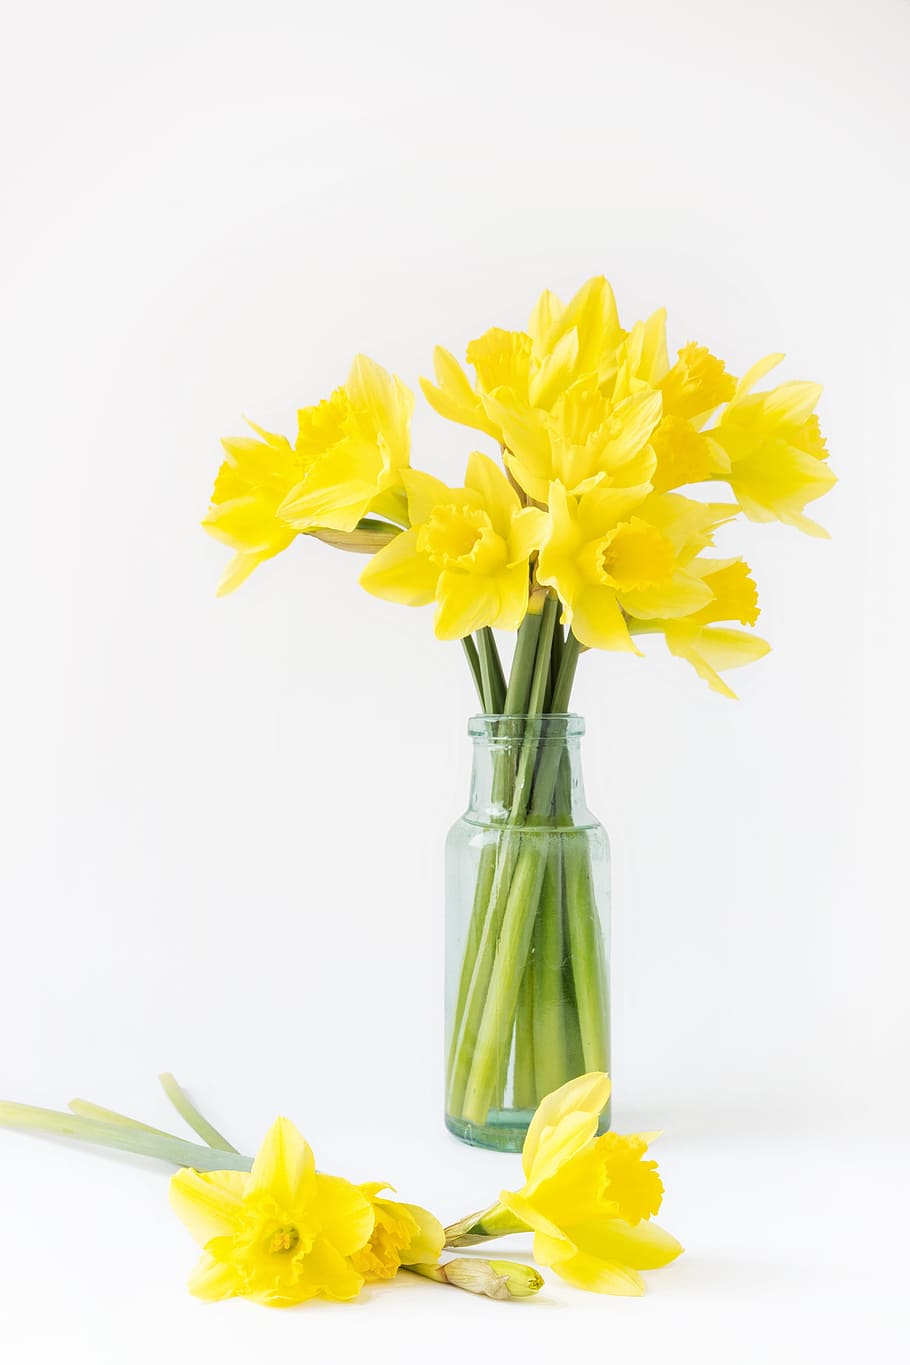 yellow, followers, tulips, freshness, flowering plant, flower, plant, vase, beauty in nature, daffodil